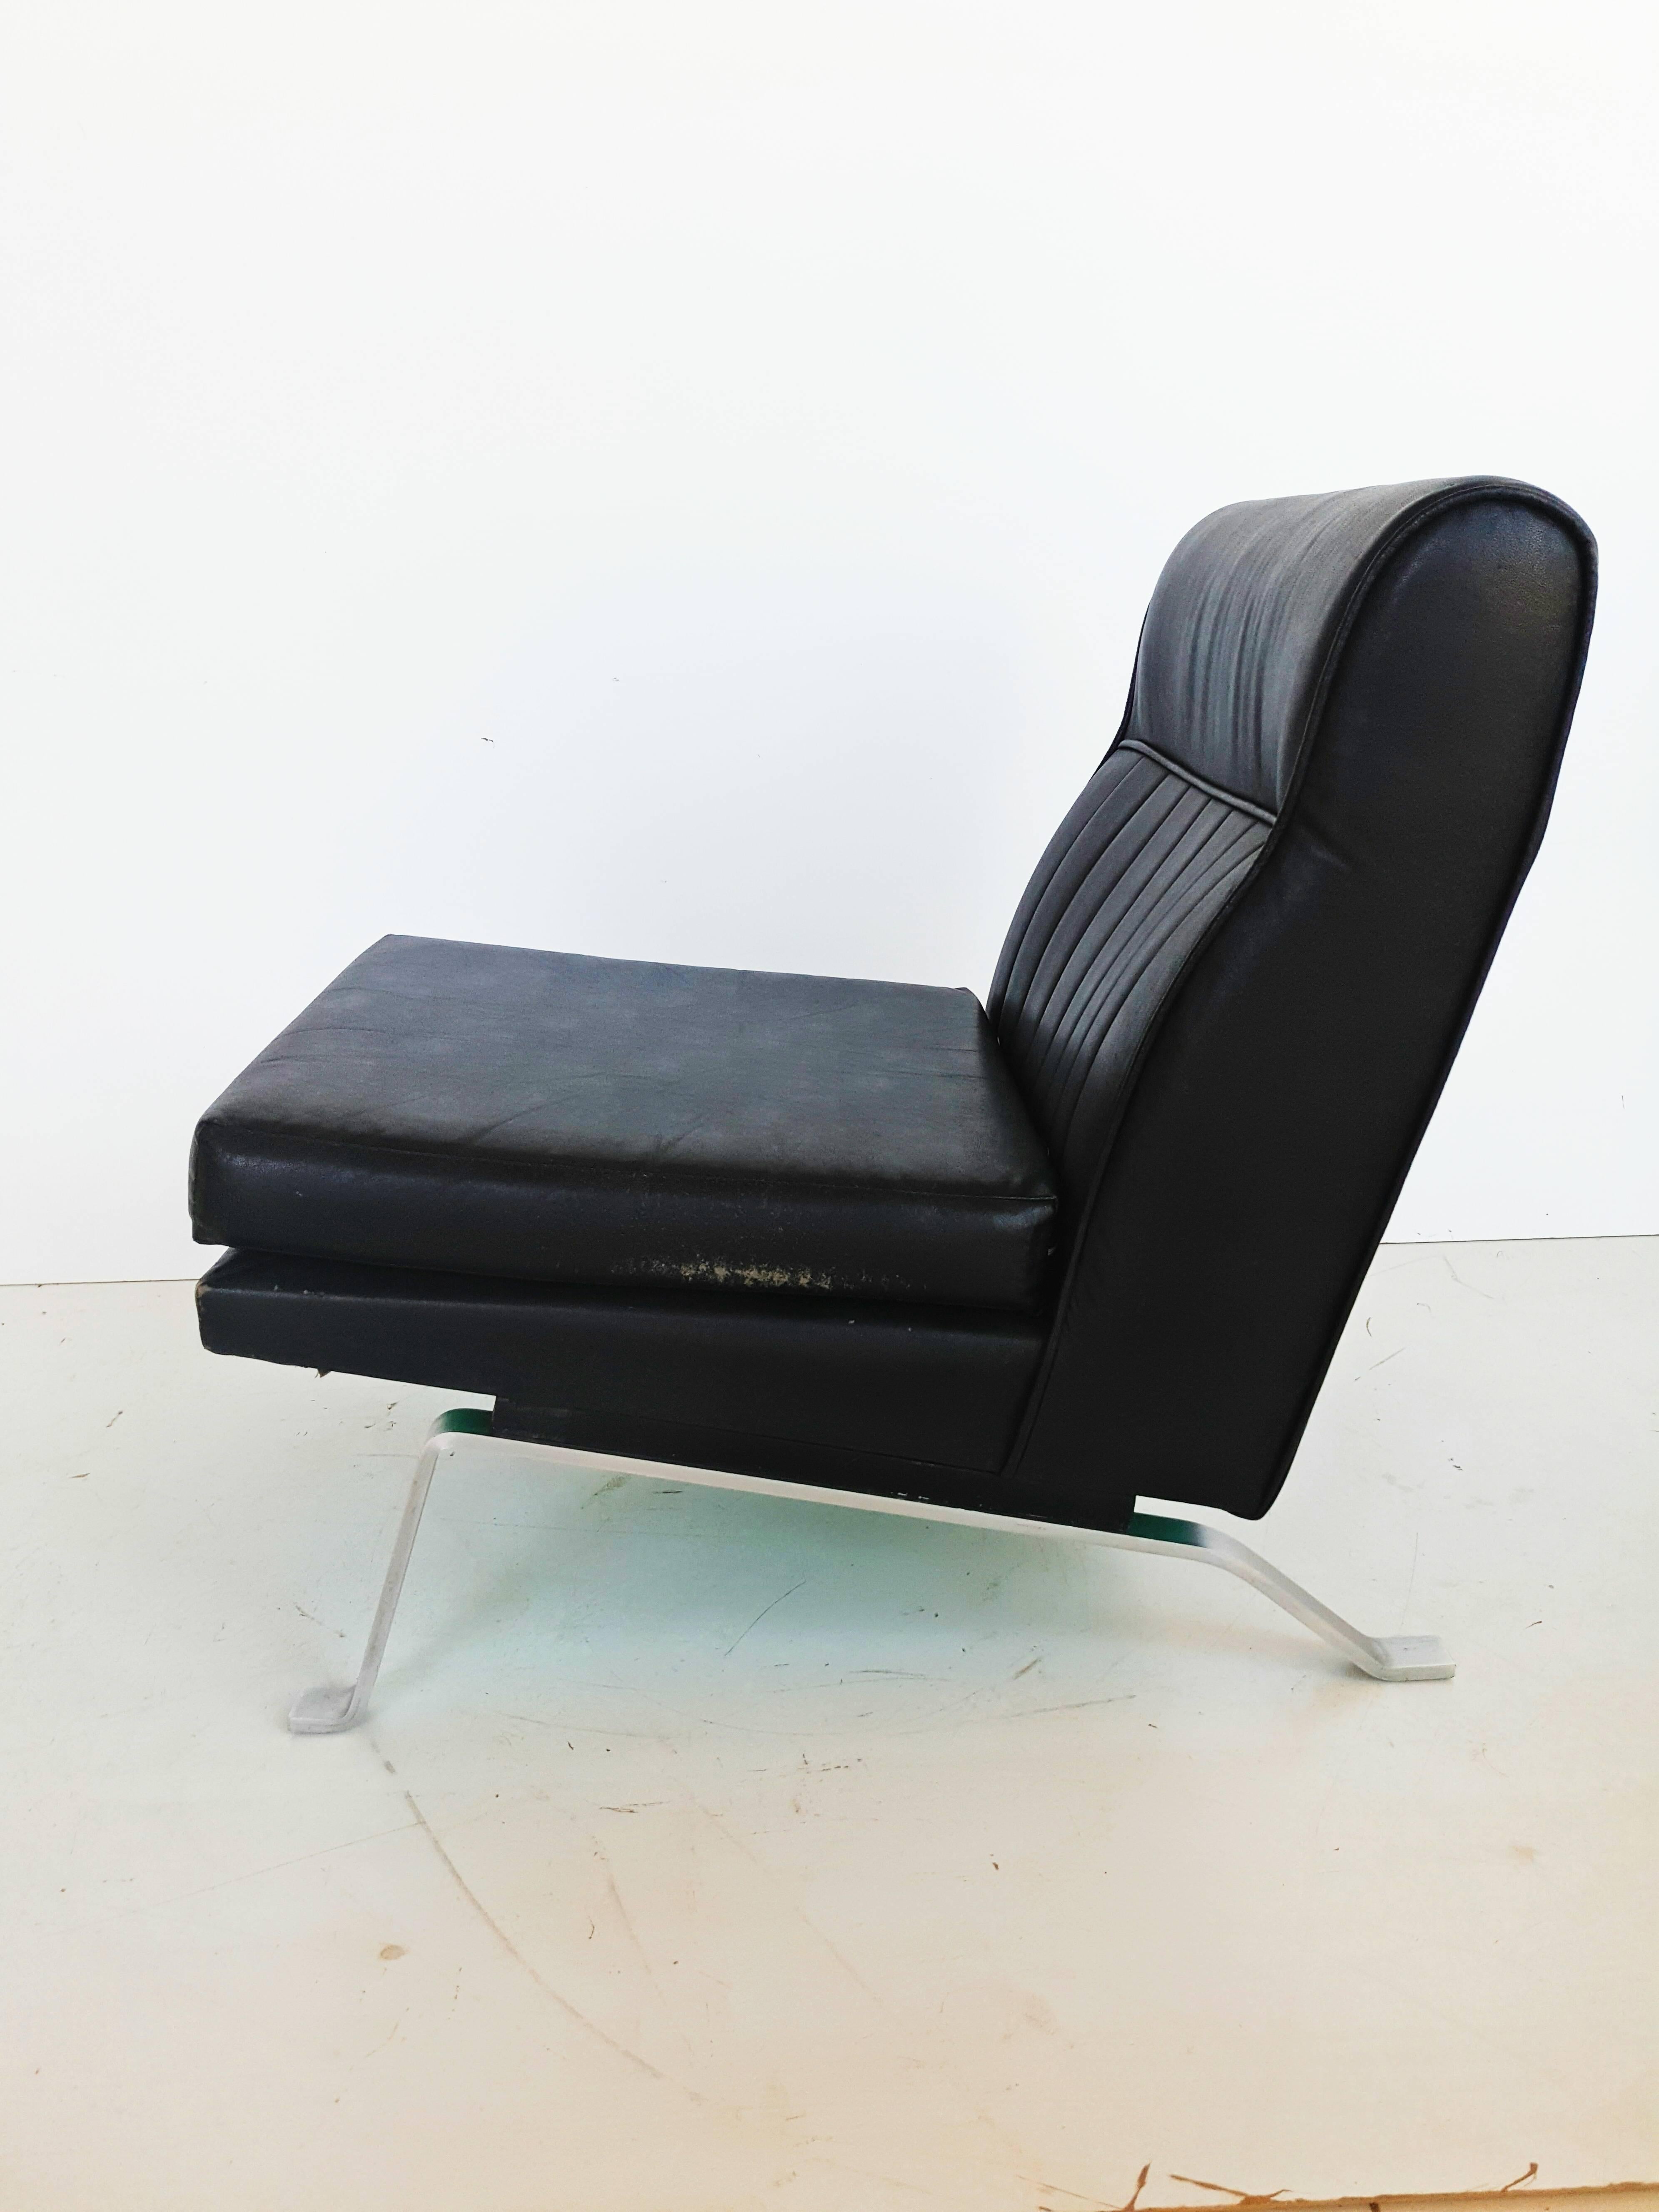 Beautiful lounge armchair manufactured in France in 1960s, original black leatherette. Very good vintage condition.